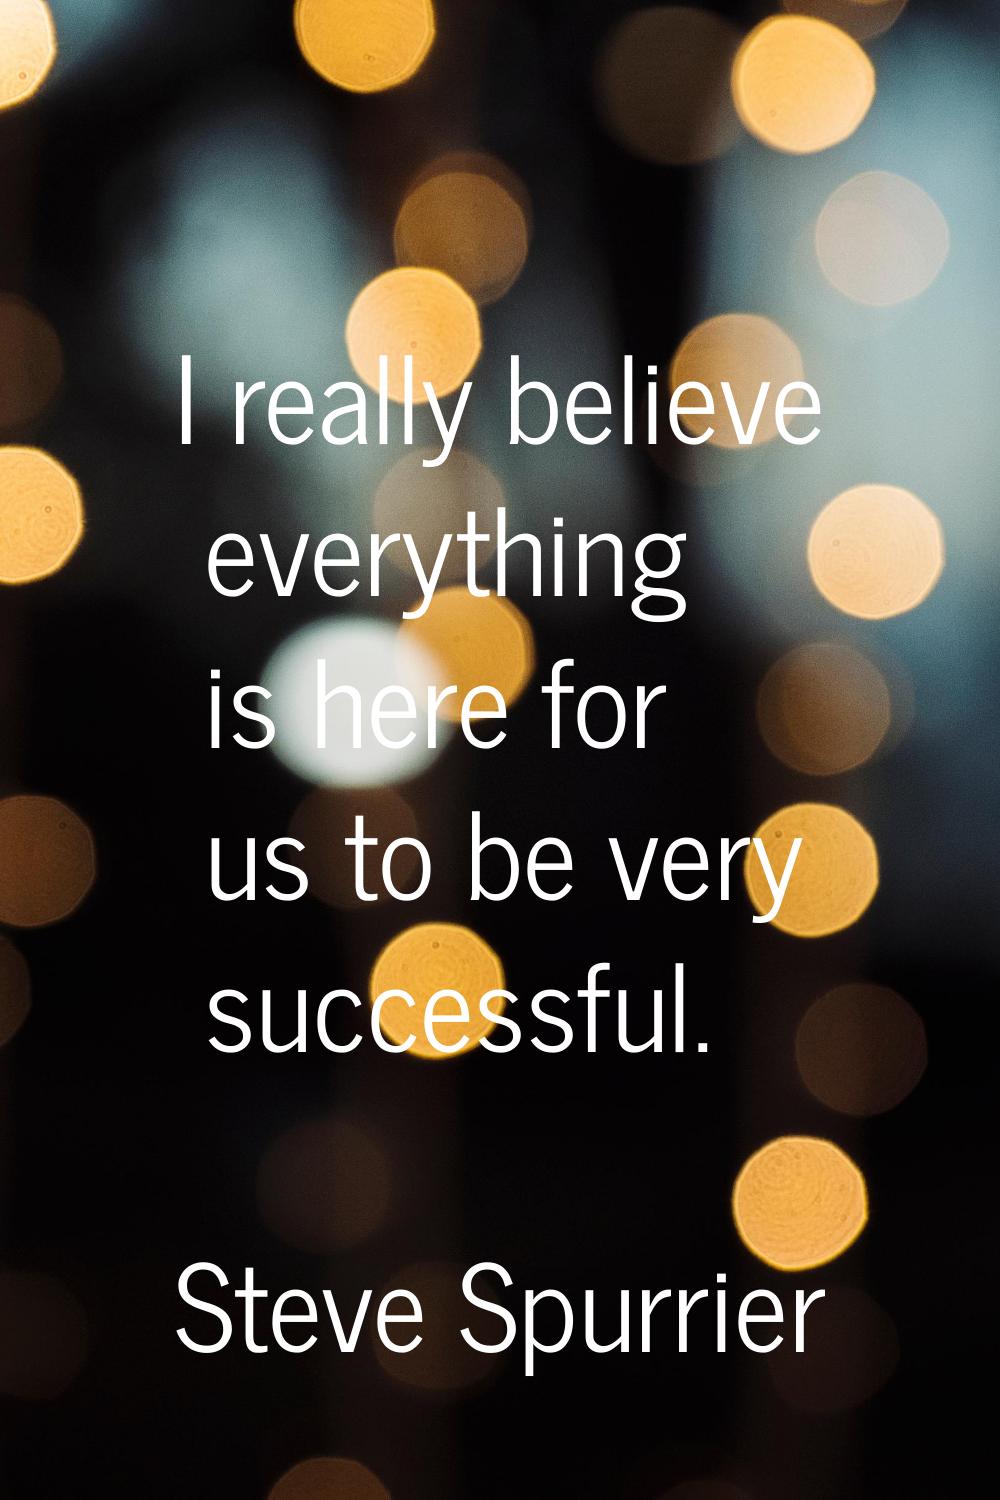 I really believe everything is here for us to be very successful.